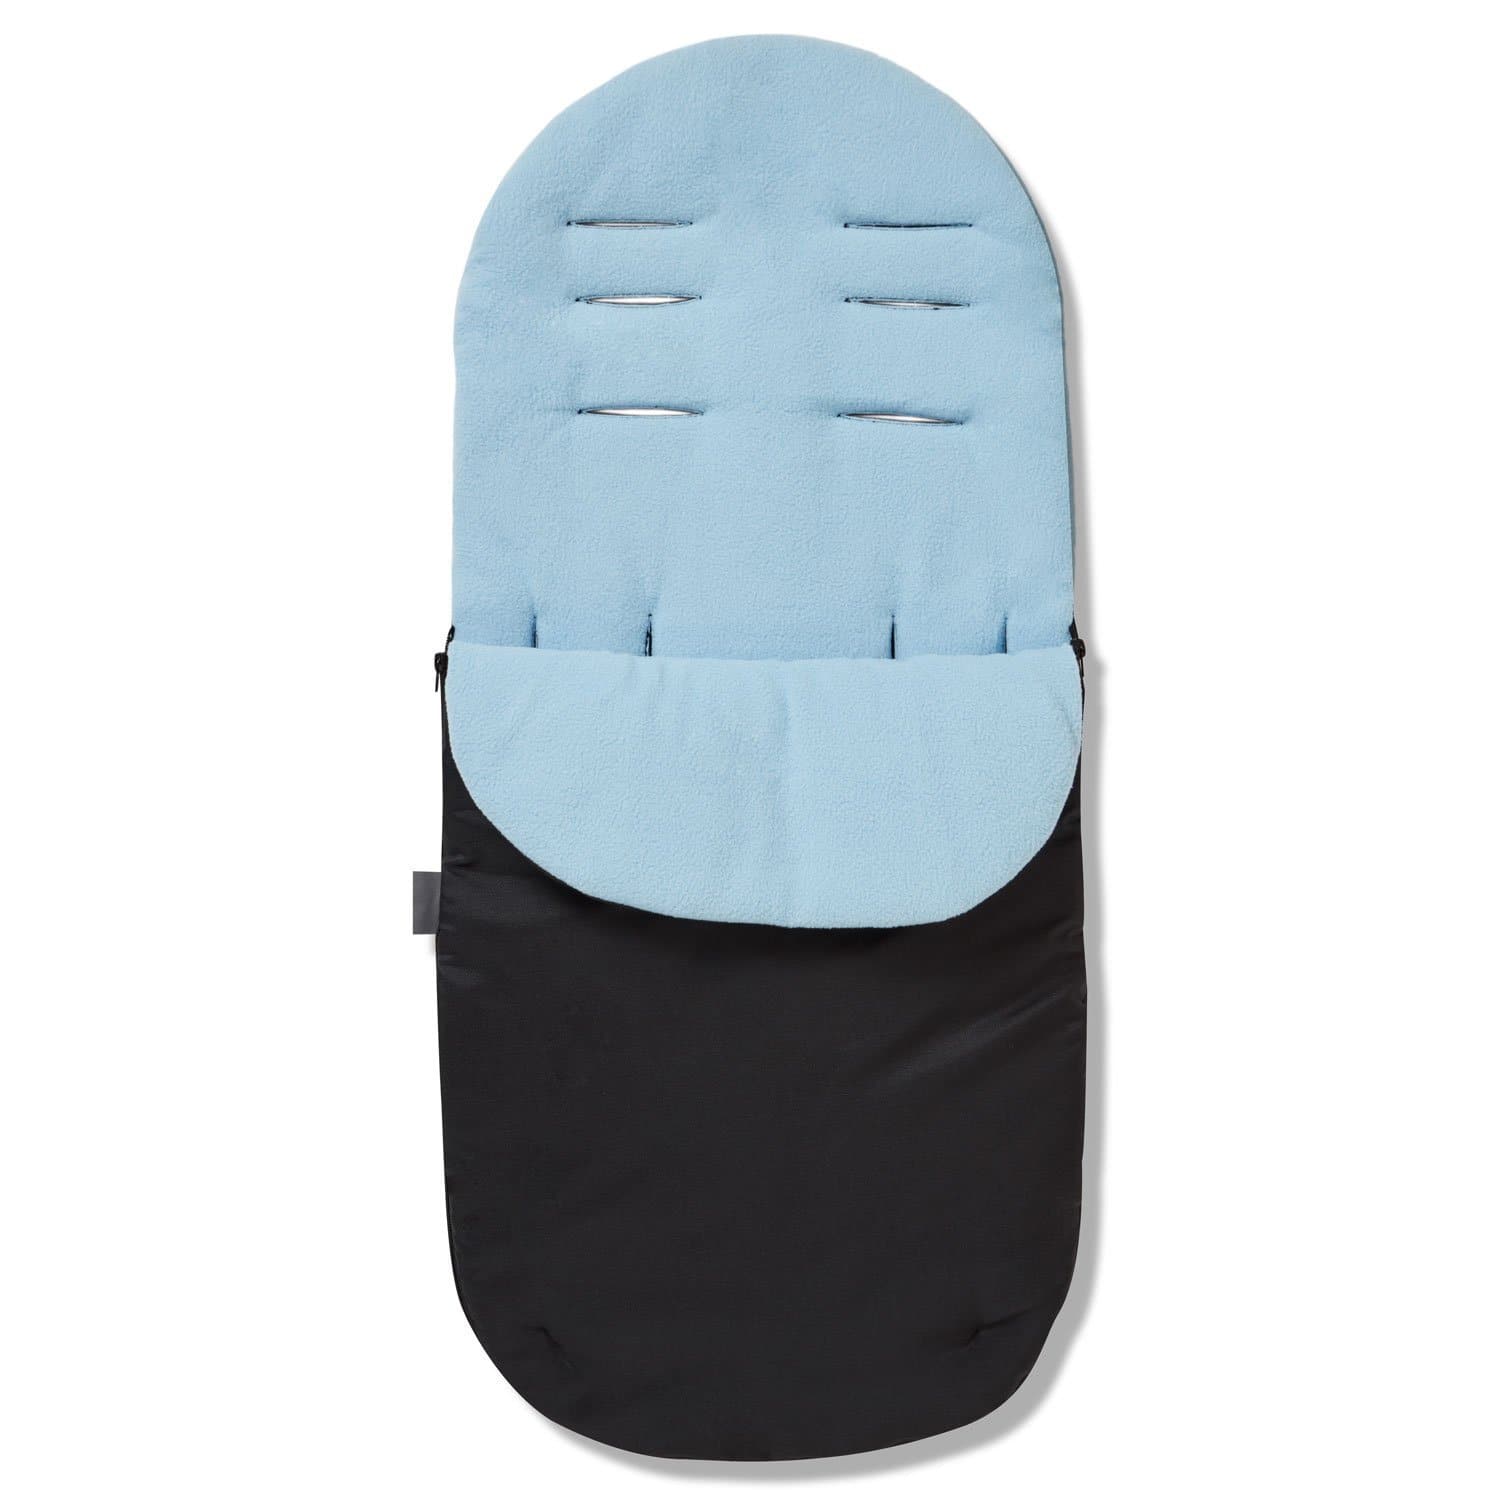 Footmuff / Cosy Toes Compatible with Babybus - Light Blue / Fits All Models | For Your Little One